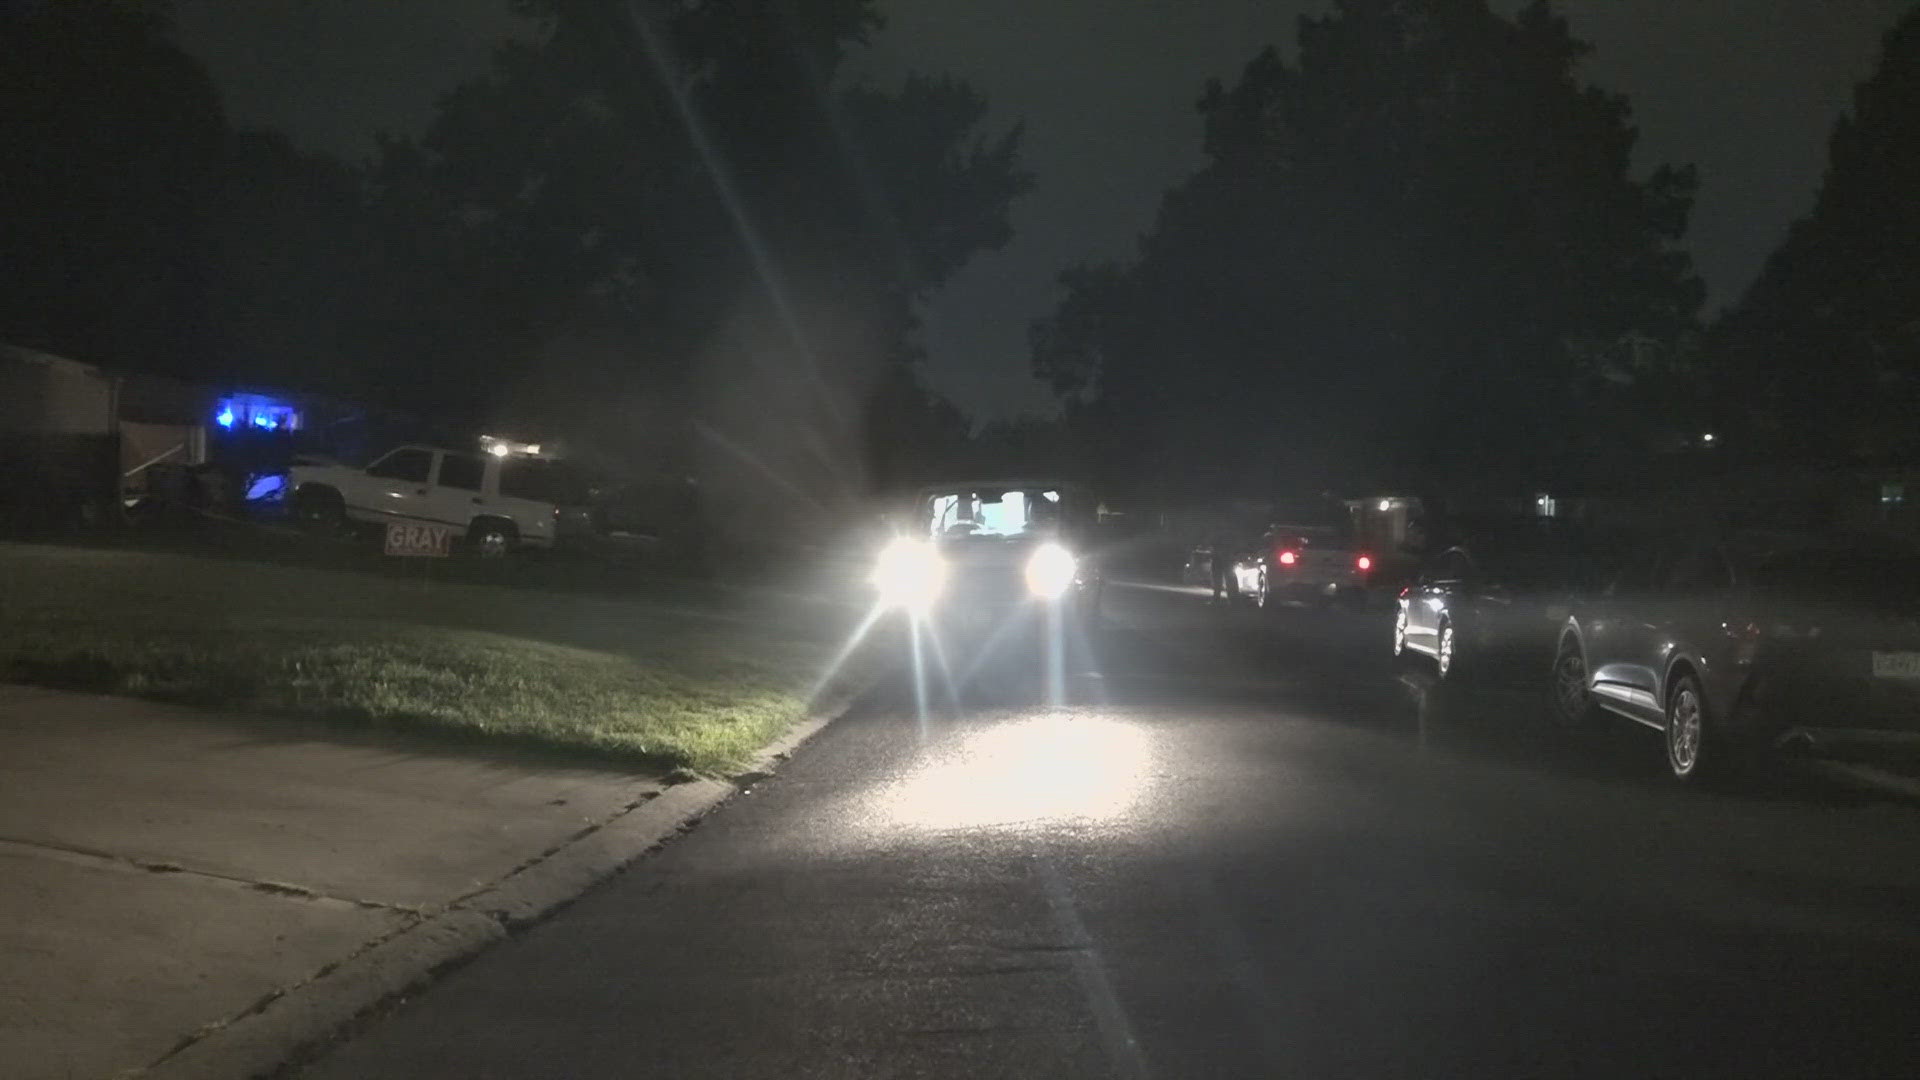 Police said the child was hospitalized with life-threatening injuries. A man was taken into custody in connection with the incident.